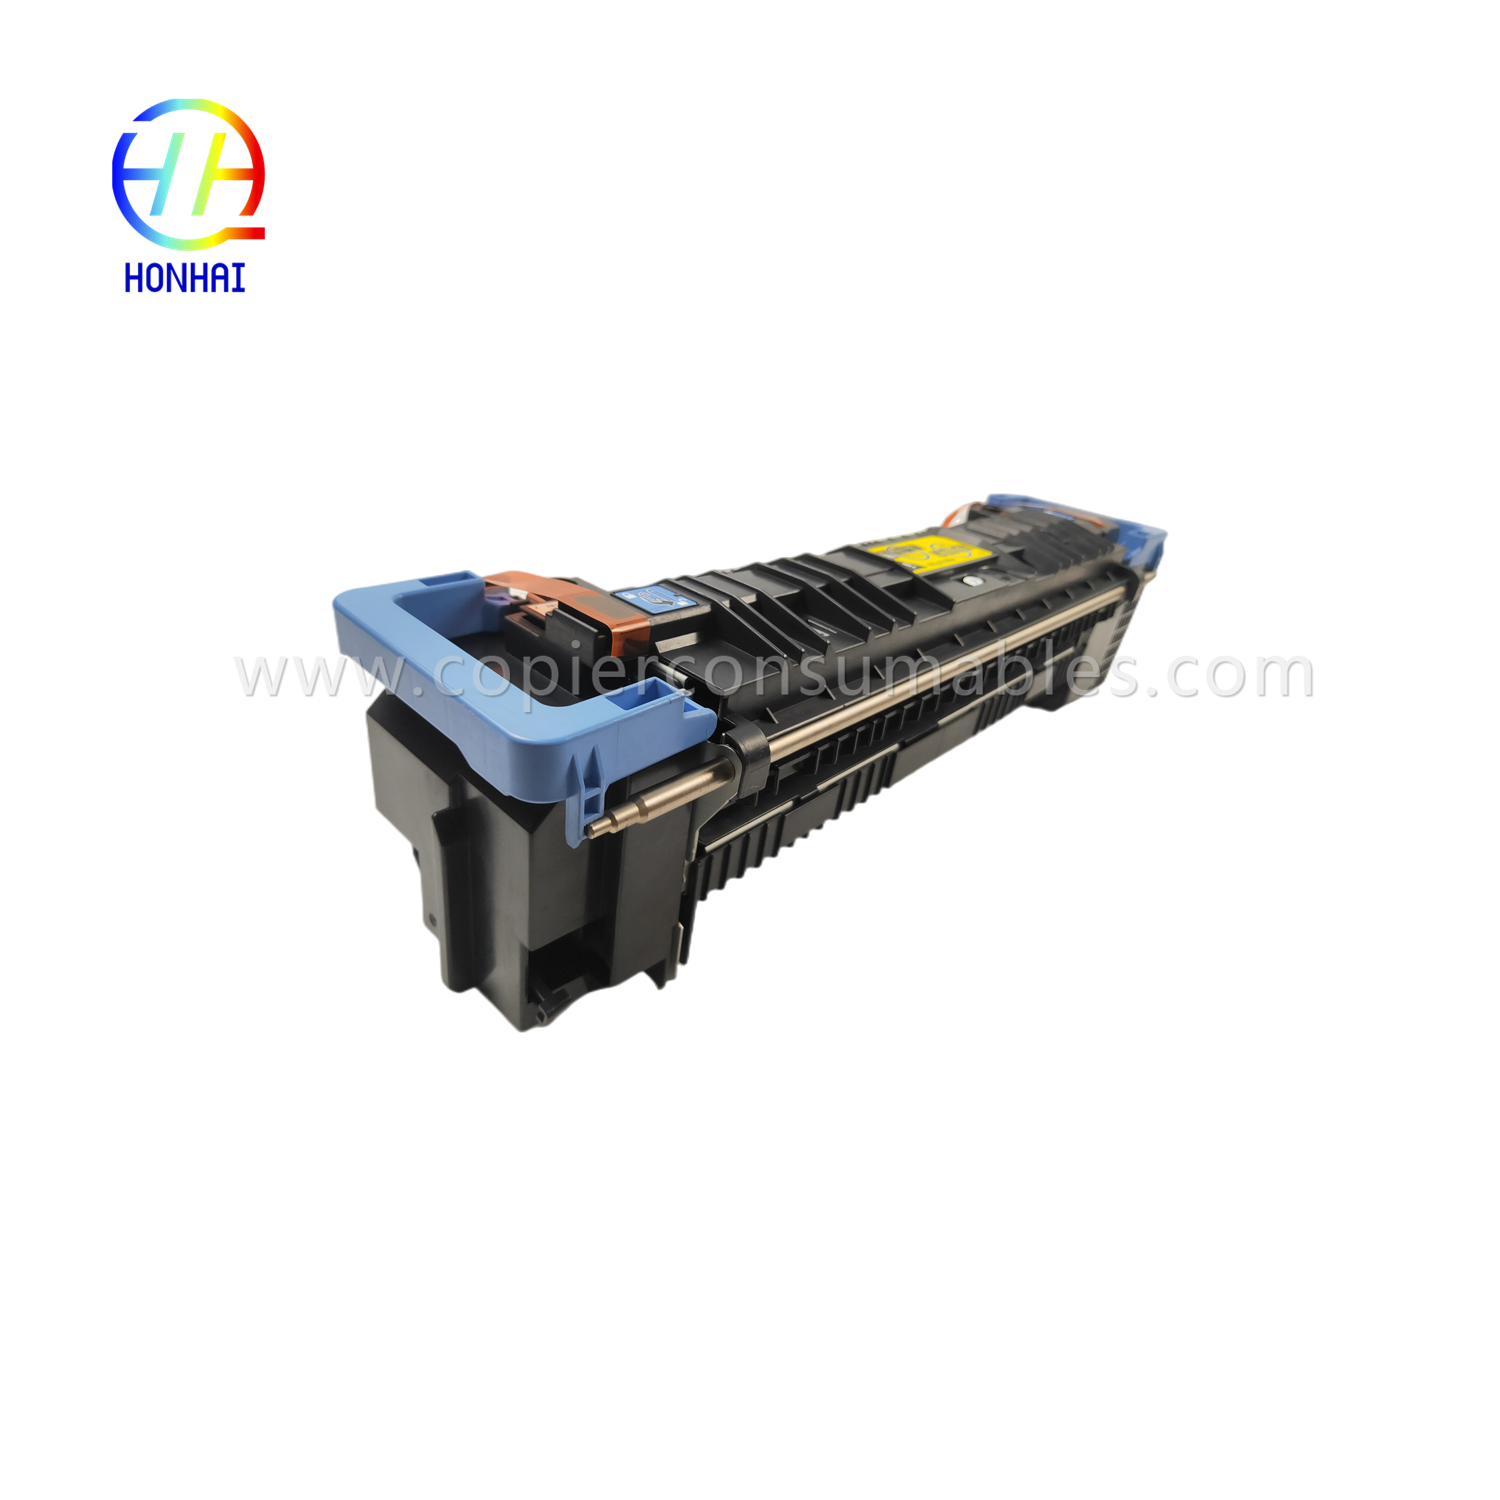 https://www.copierconsumables.com/fuser-assembly-unit-for-hp-m855-m880-m855dn-m855xh-m880z-m880z-c1n54-67901-c1n58-67901-fusing-heating-assy-product/